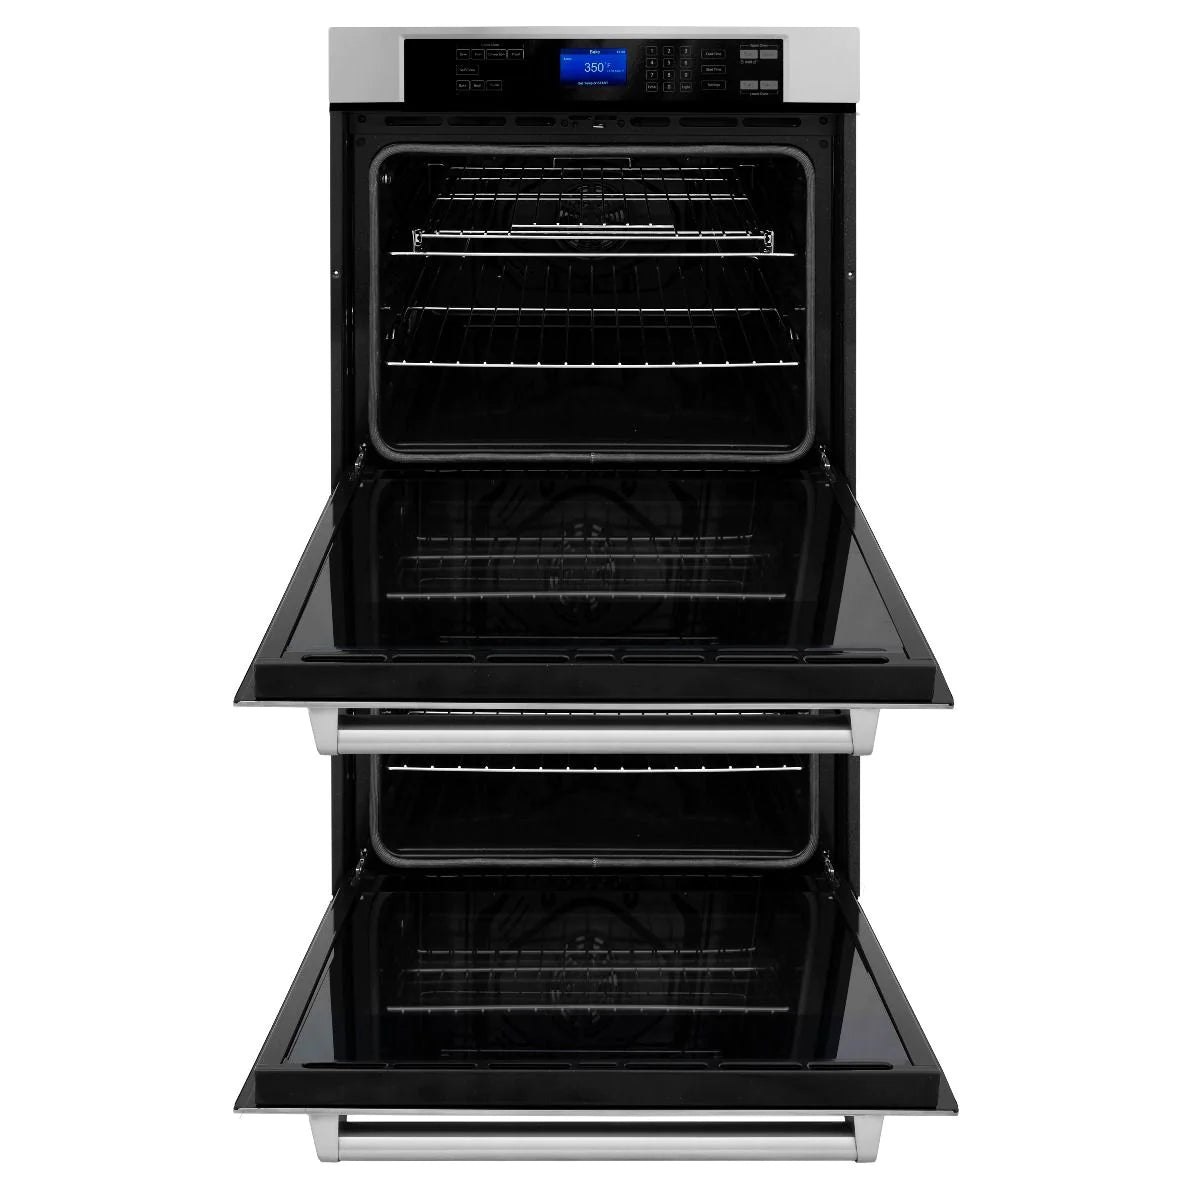 ZLINE Kitchen Package with Refrigeration, 36 in. Stainless Steel Gas Rangetop, 36 in. Convertible Vent Range Hood, 30 in. Double Wall Oven, and 24 in. Tall Tub Dishwasher (5KPR-RTRH36-AWDDWV)